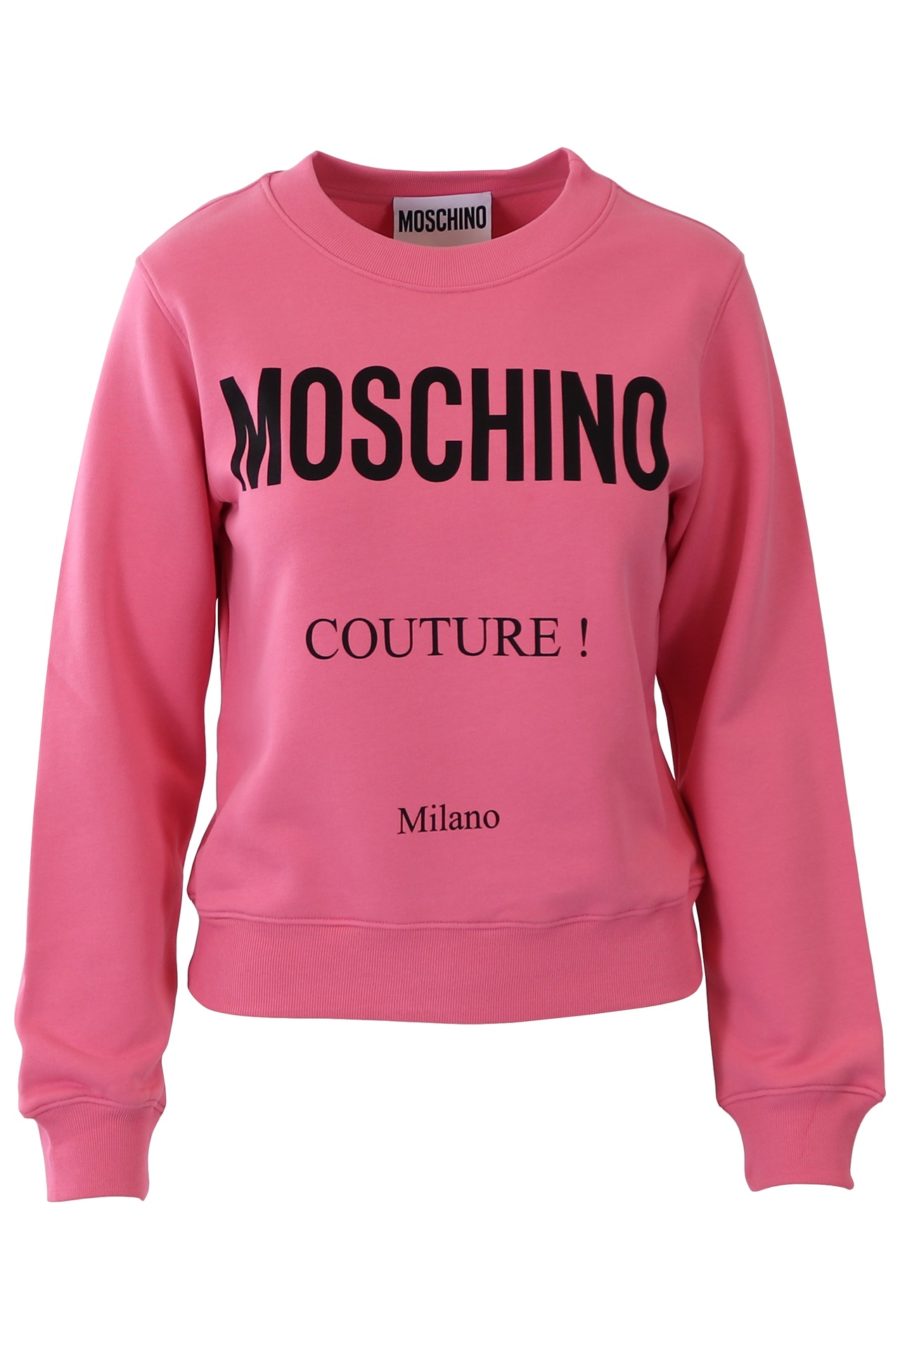 Sudadera Moschino Couture rosa couture milano - d174883551ab7fd6a430875342f77d5439343282